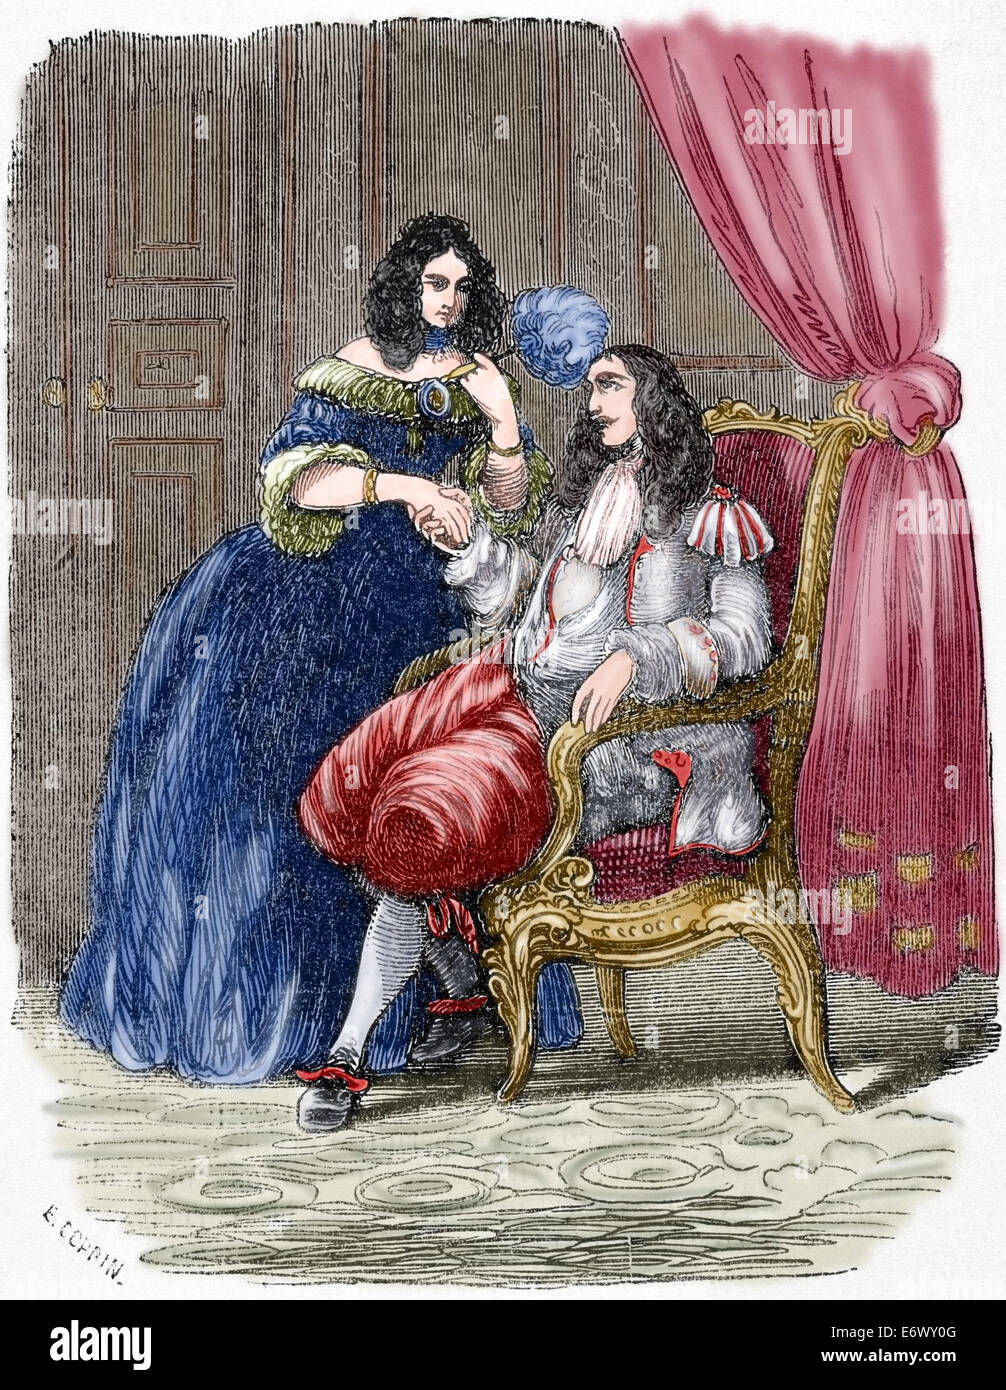 Louis XIV (1638-1715). King of France. Louis XIV and his mistress Stock Photo: 73099392 - Alamy